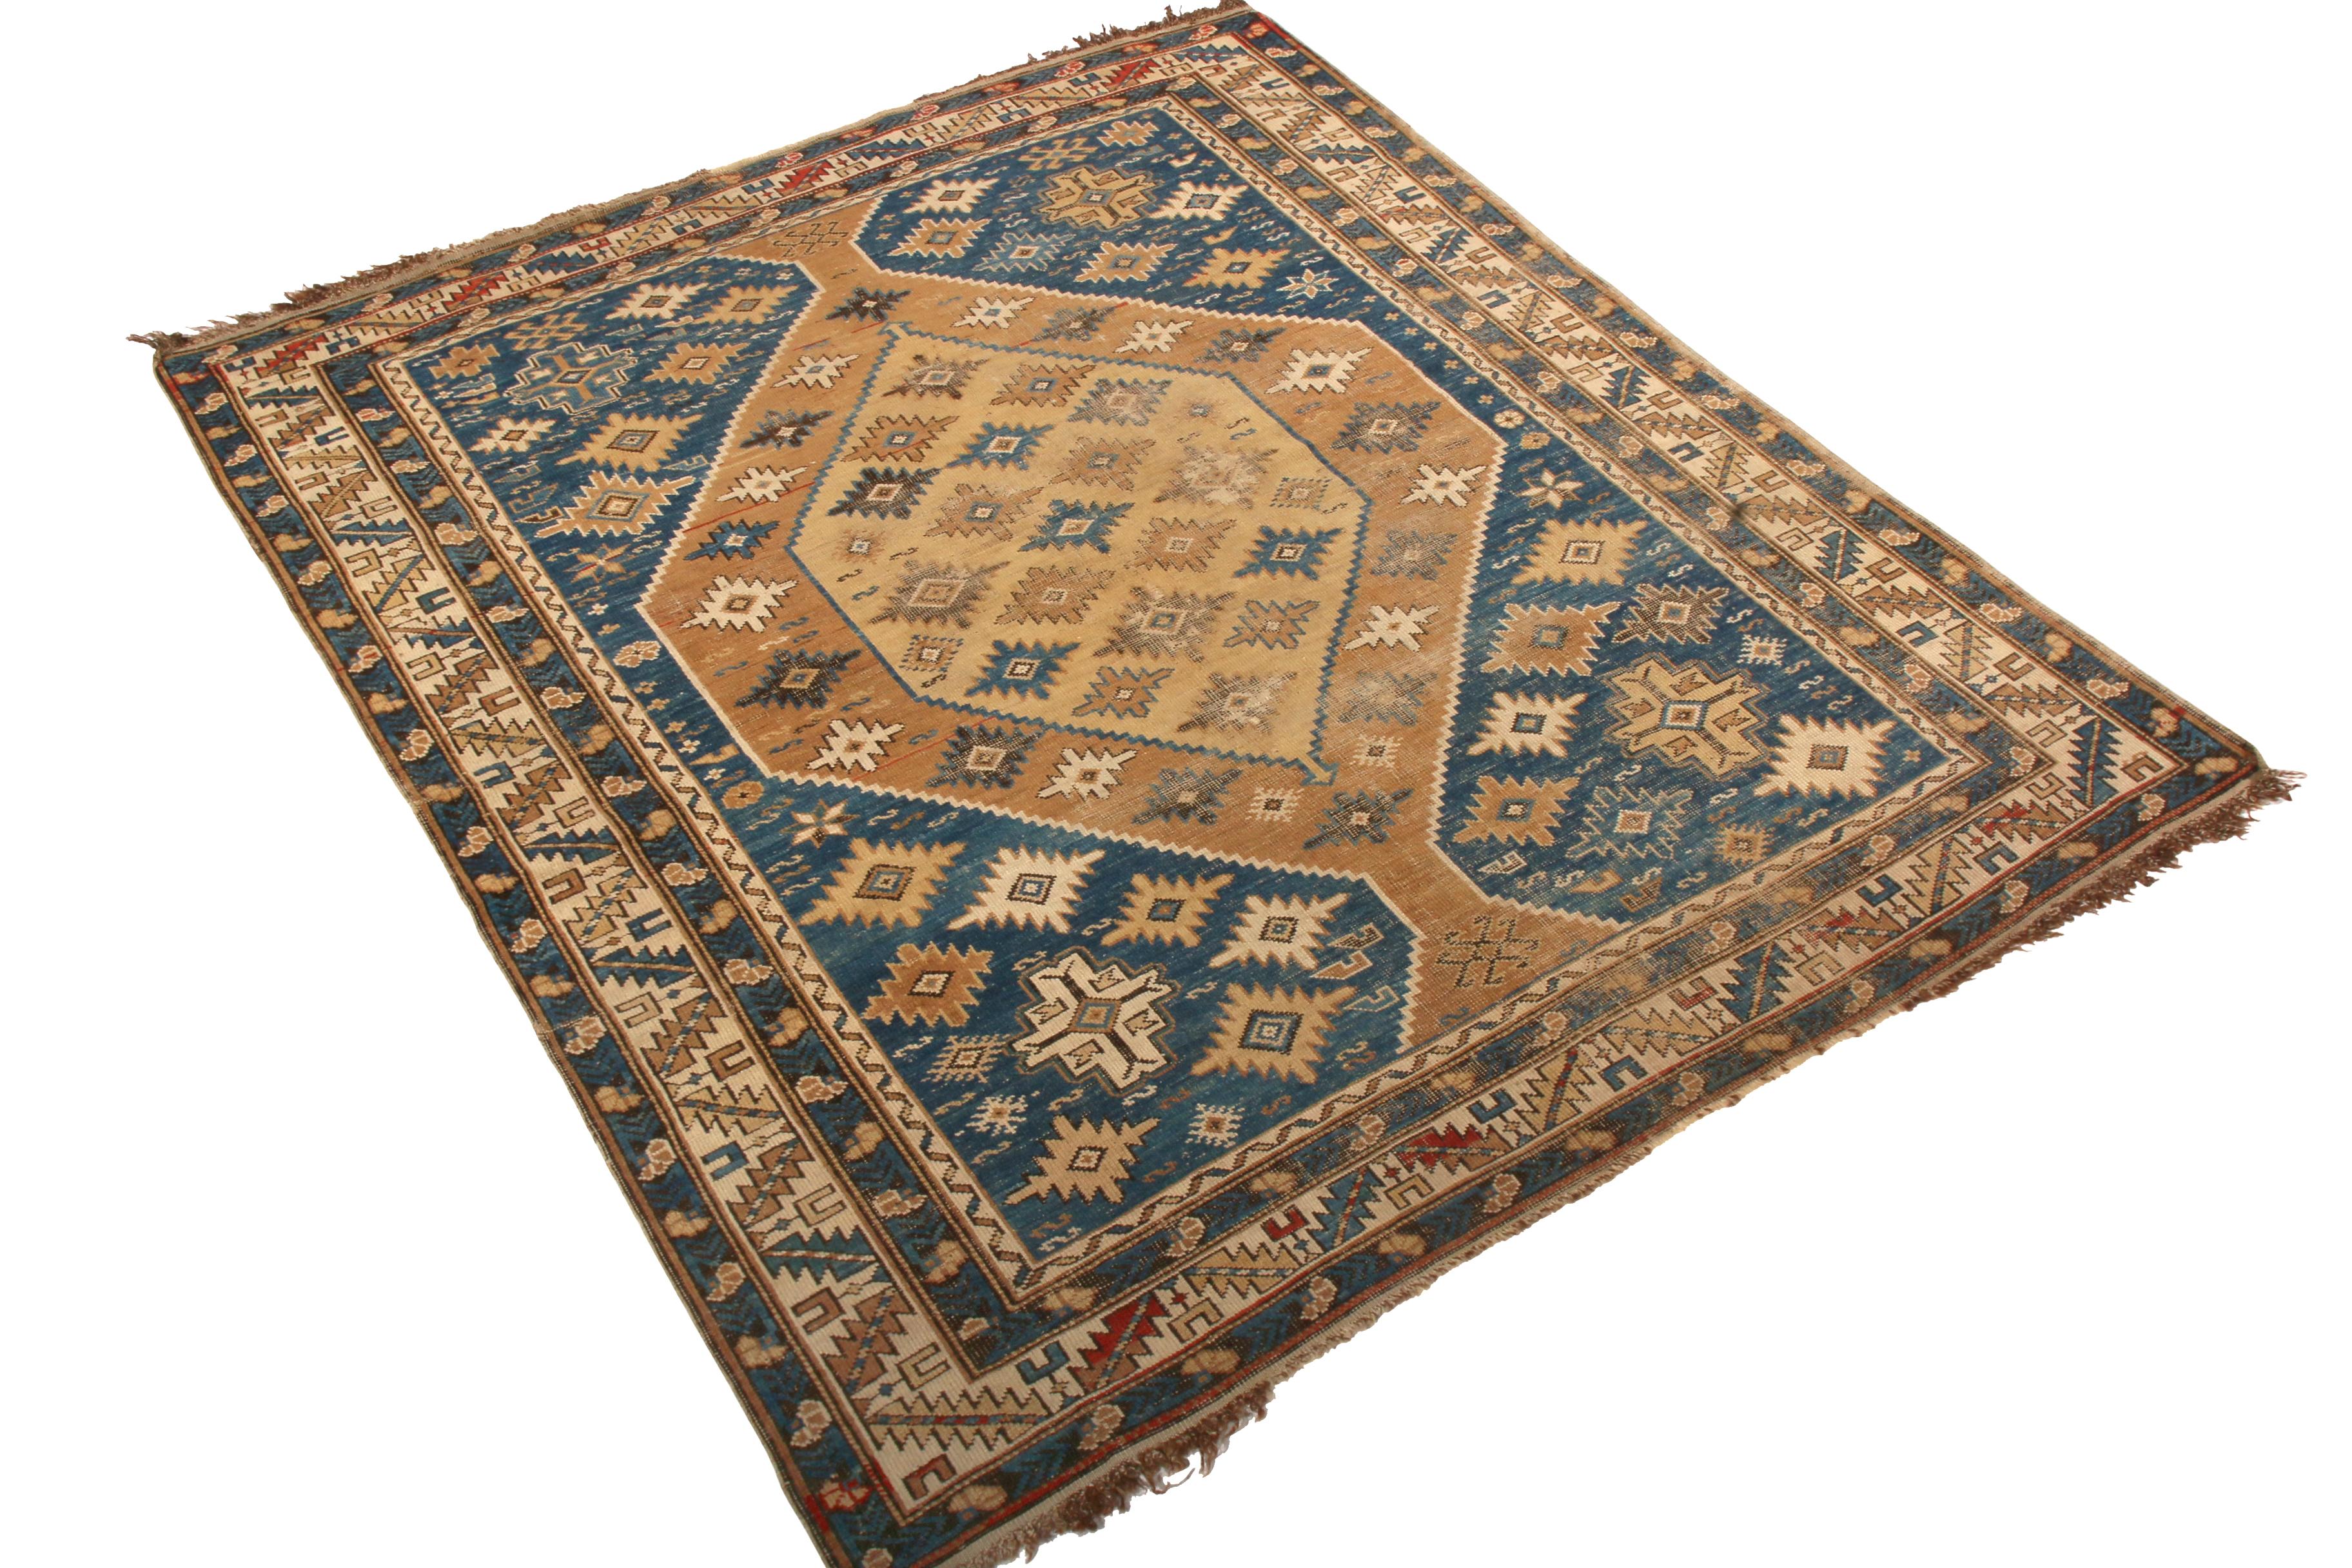 Hand knotted in wool originating from Russia between 1910-1920, this antique Kuba rug enjoys a celebrated take on traditional colorway hues this time-honored rug family favors—a play of rich beige brown and abrashed blue bringing out the meticulous